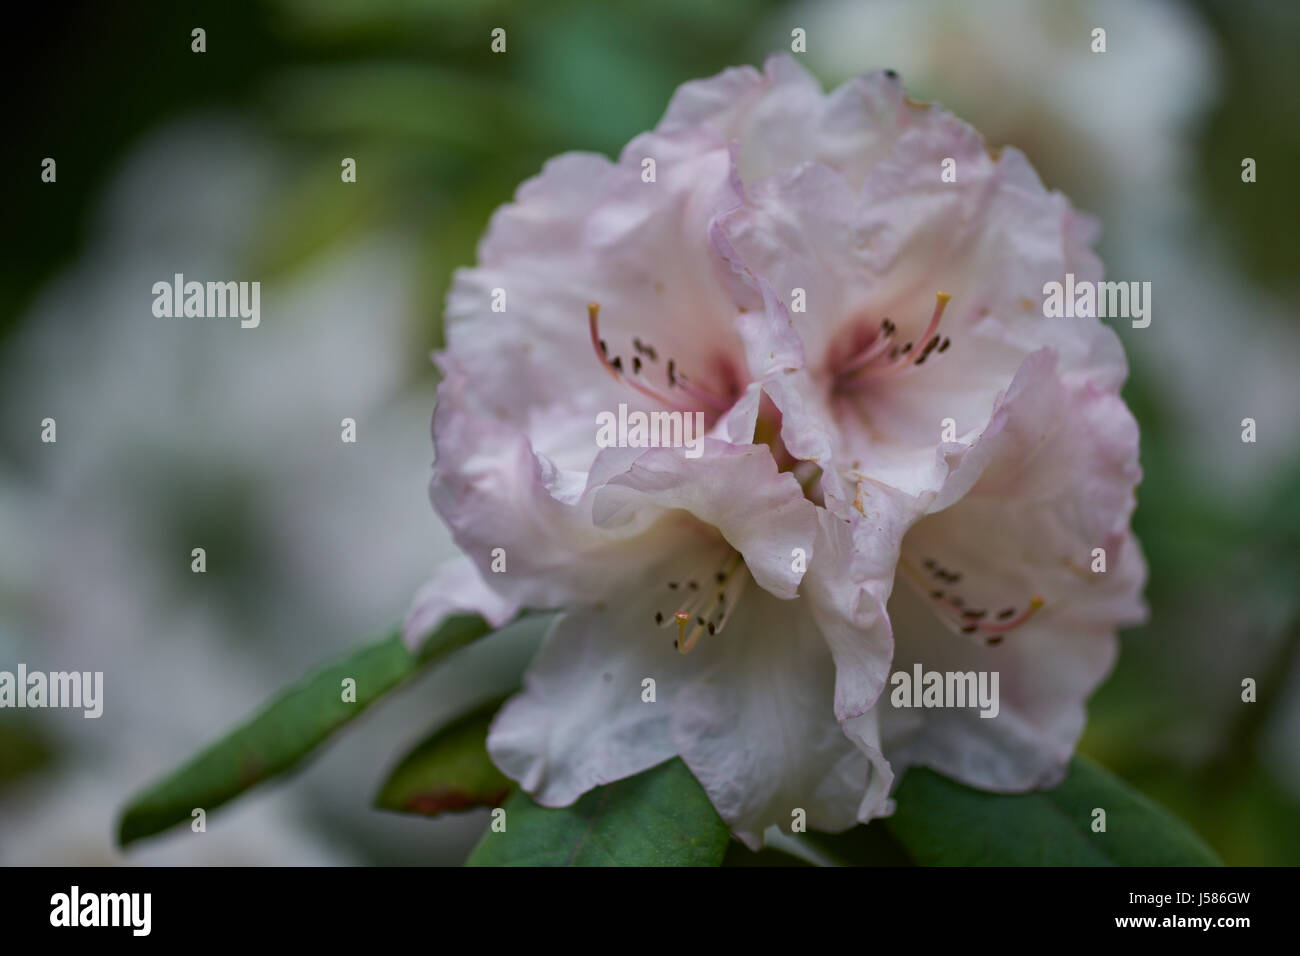 White pinkish Rhododendron Adriaan Koster blossom flowers close up Stock Photo